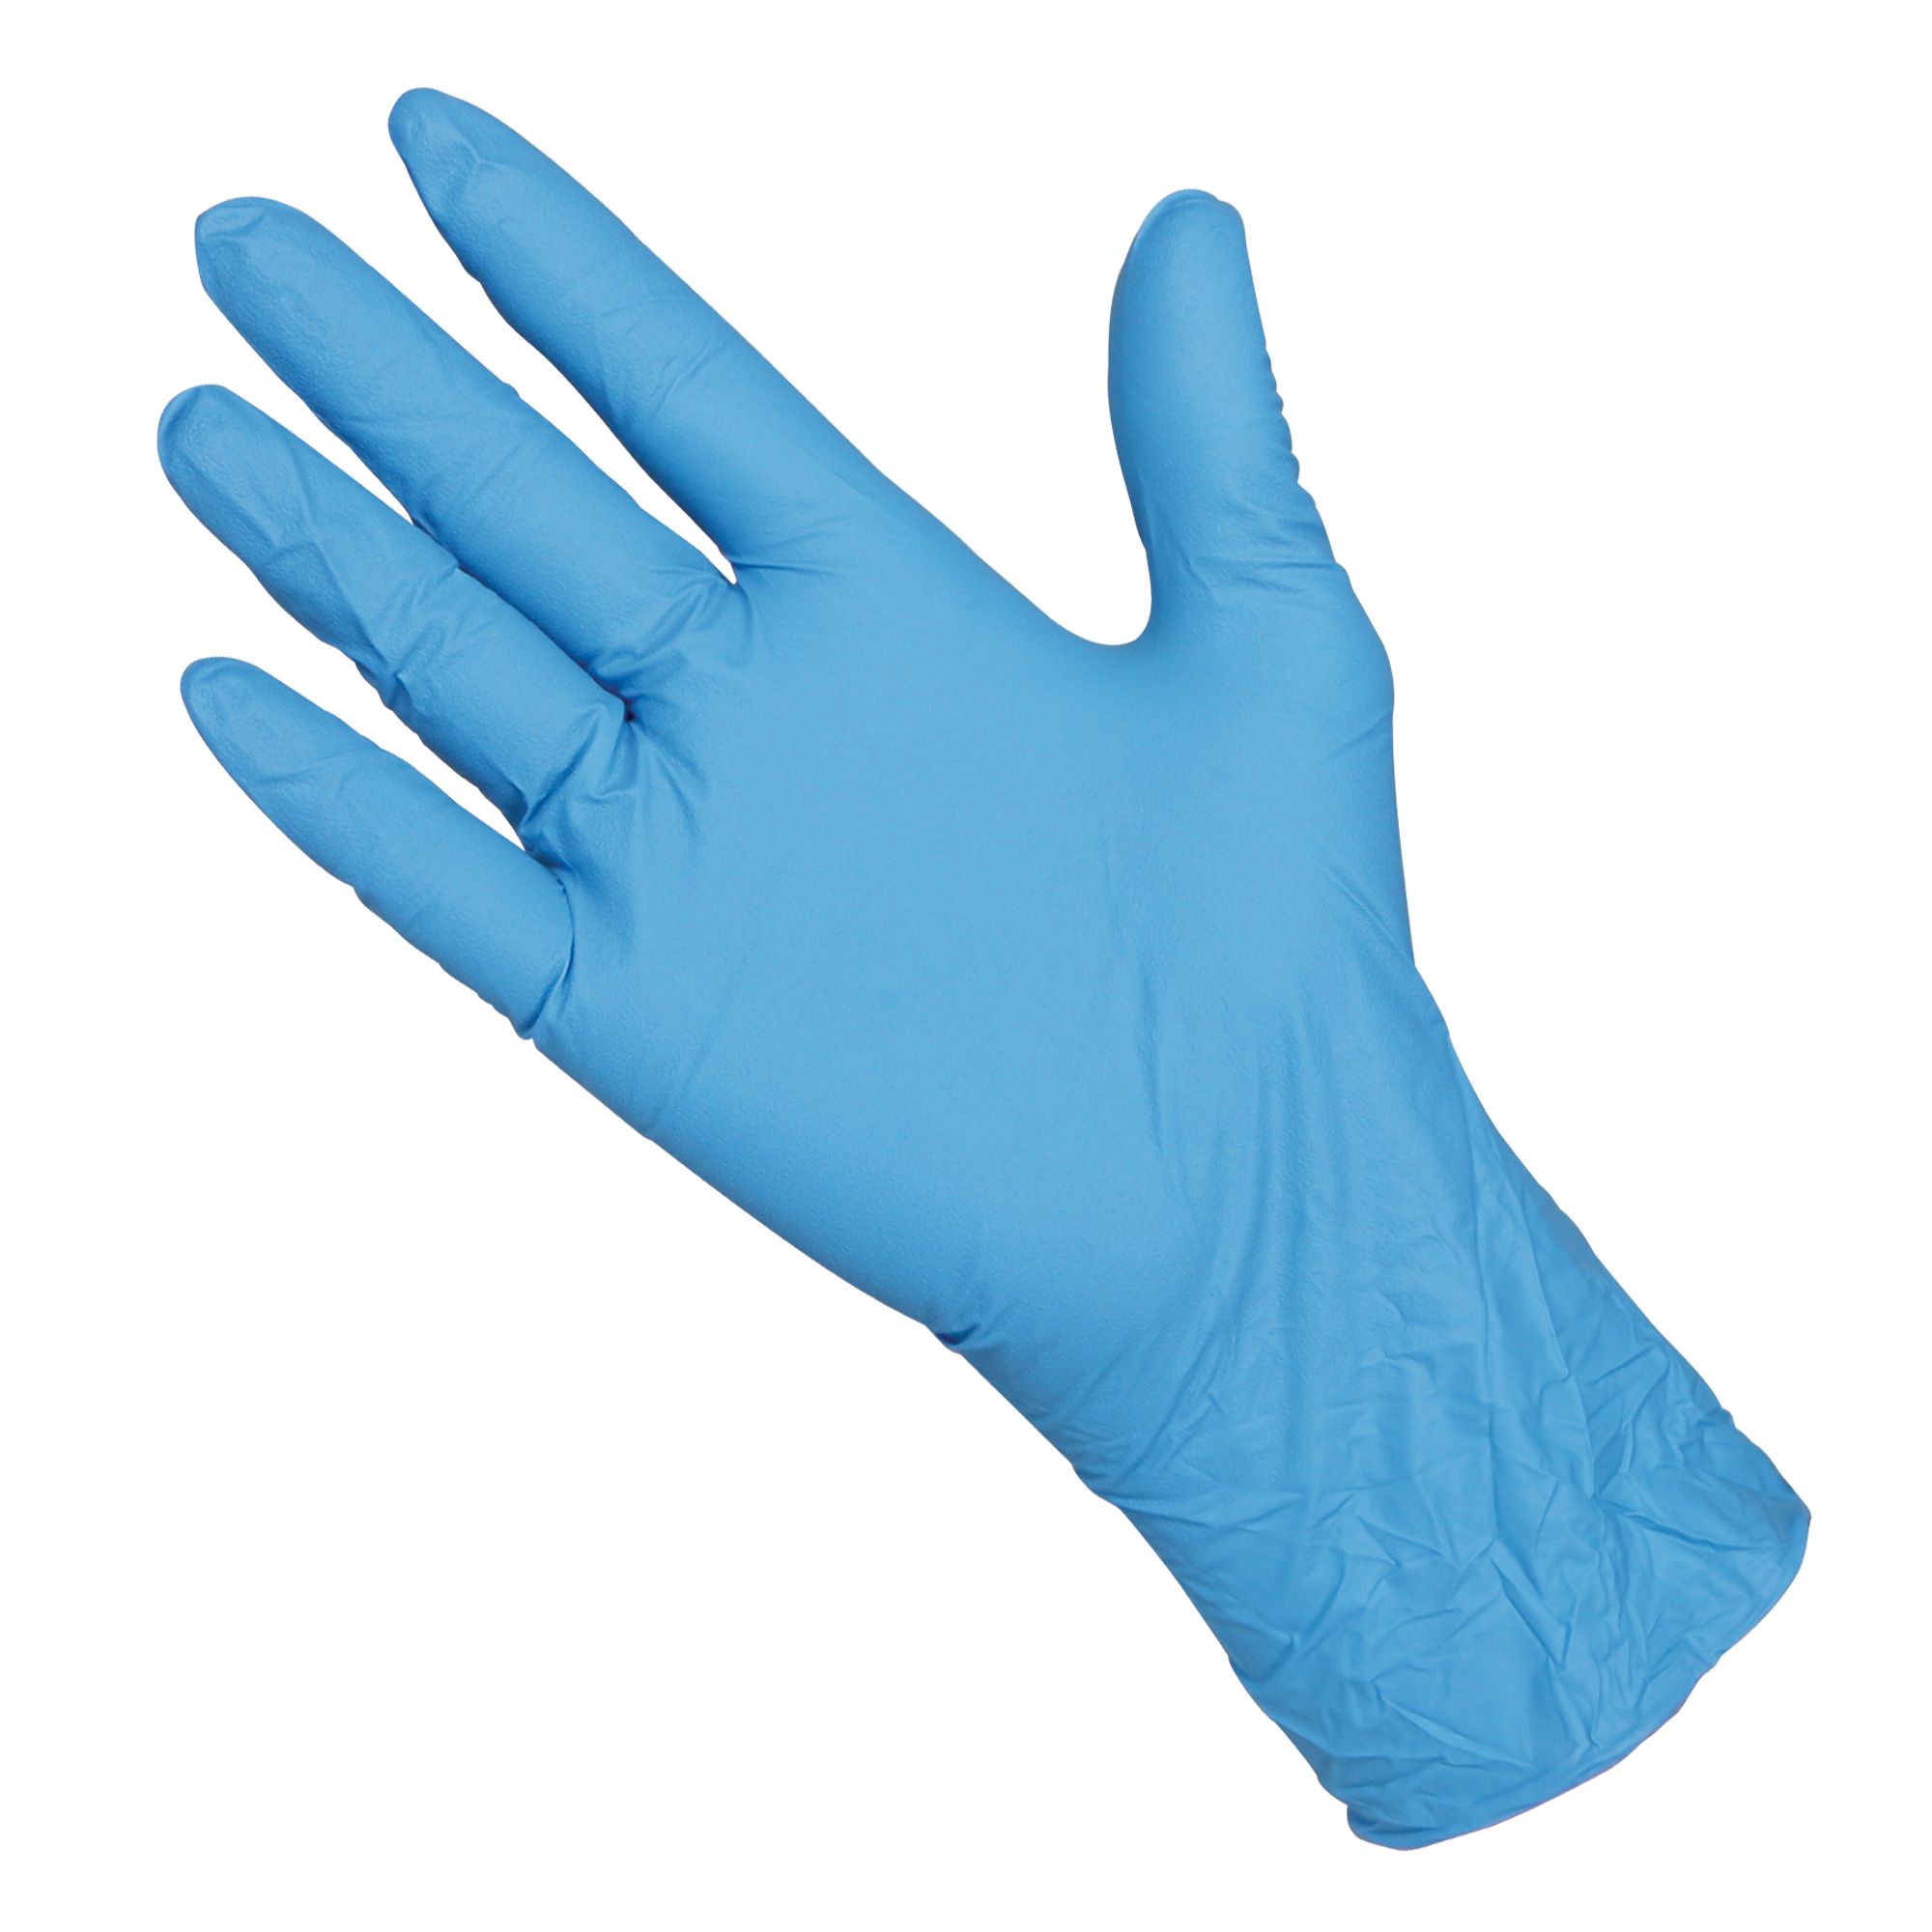 Latex Free Medical Disposable Gloves Rubber Work Gloves for Cleaning,Exam Gloves 007# L Sagton 50 Pairs Industrial Disposable Nitrile Gloves Mechanic Tasks Sanitary Powder Free 